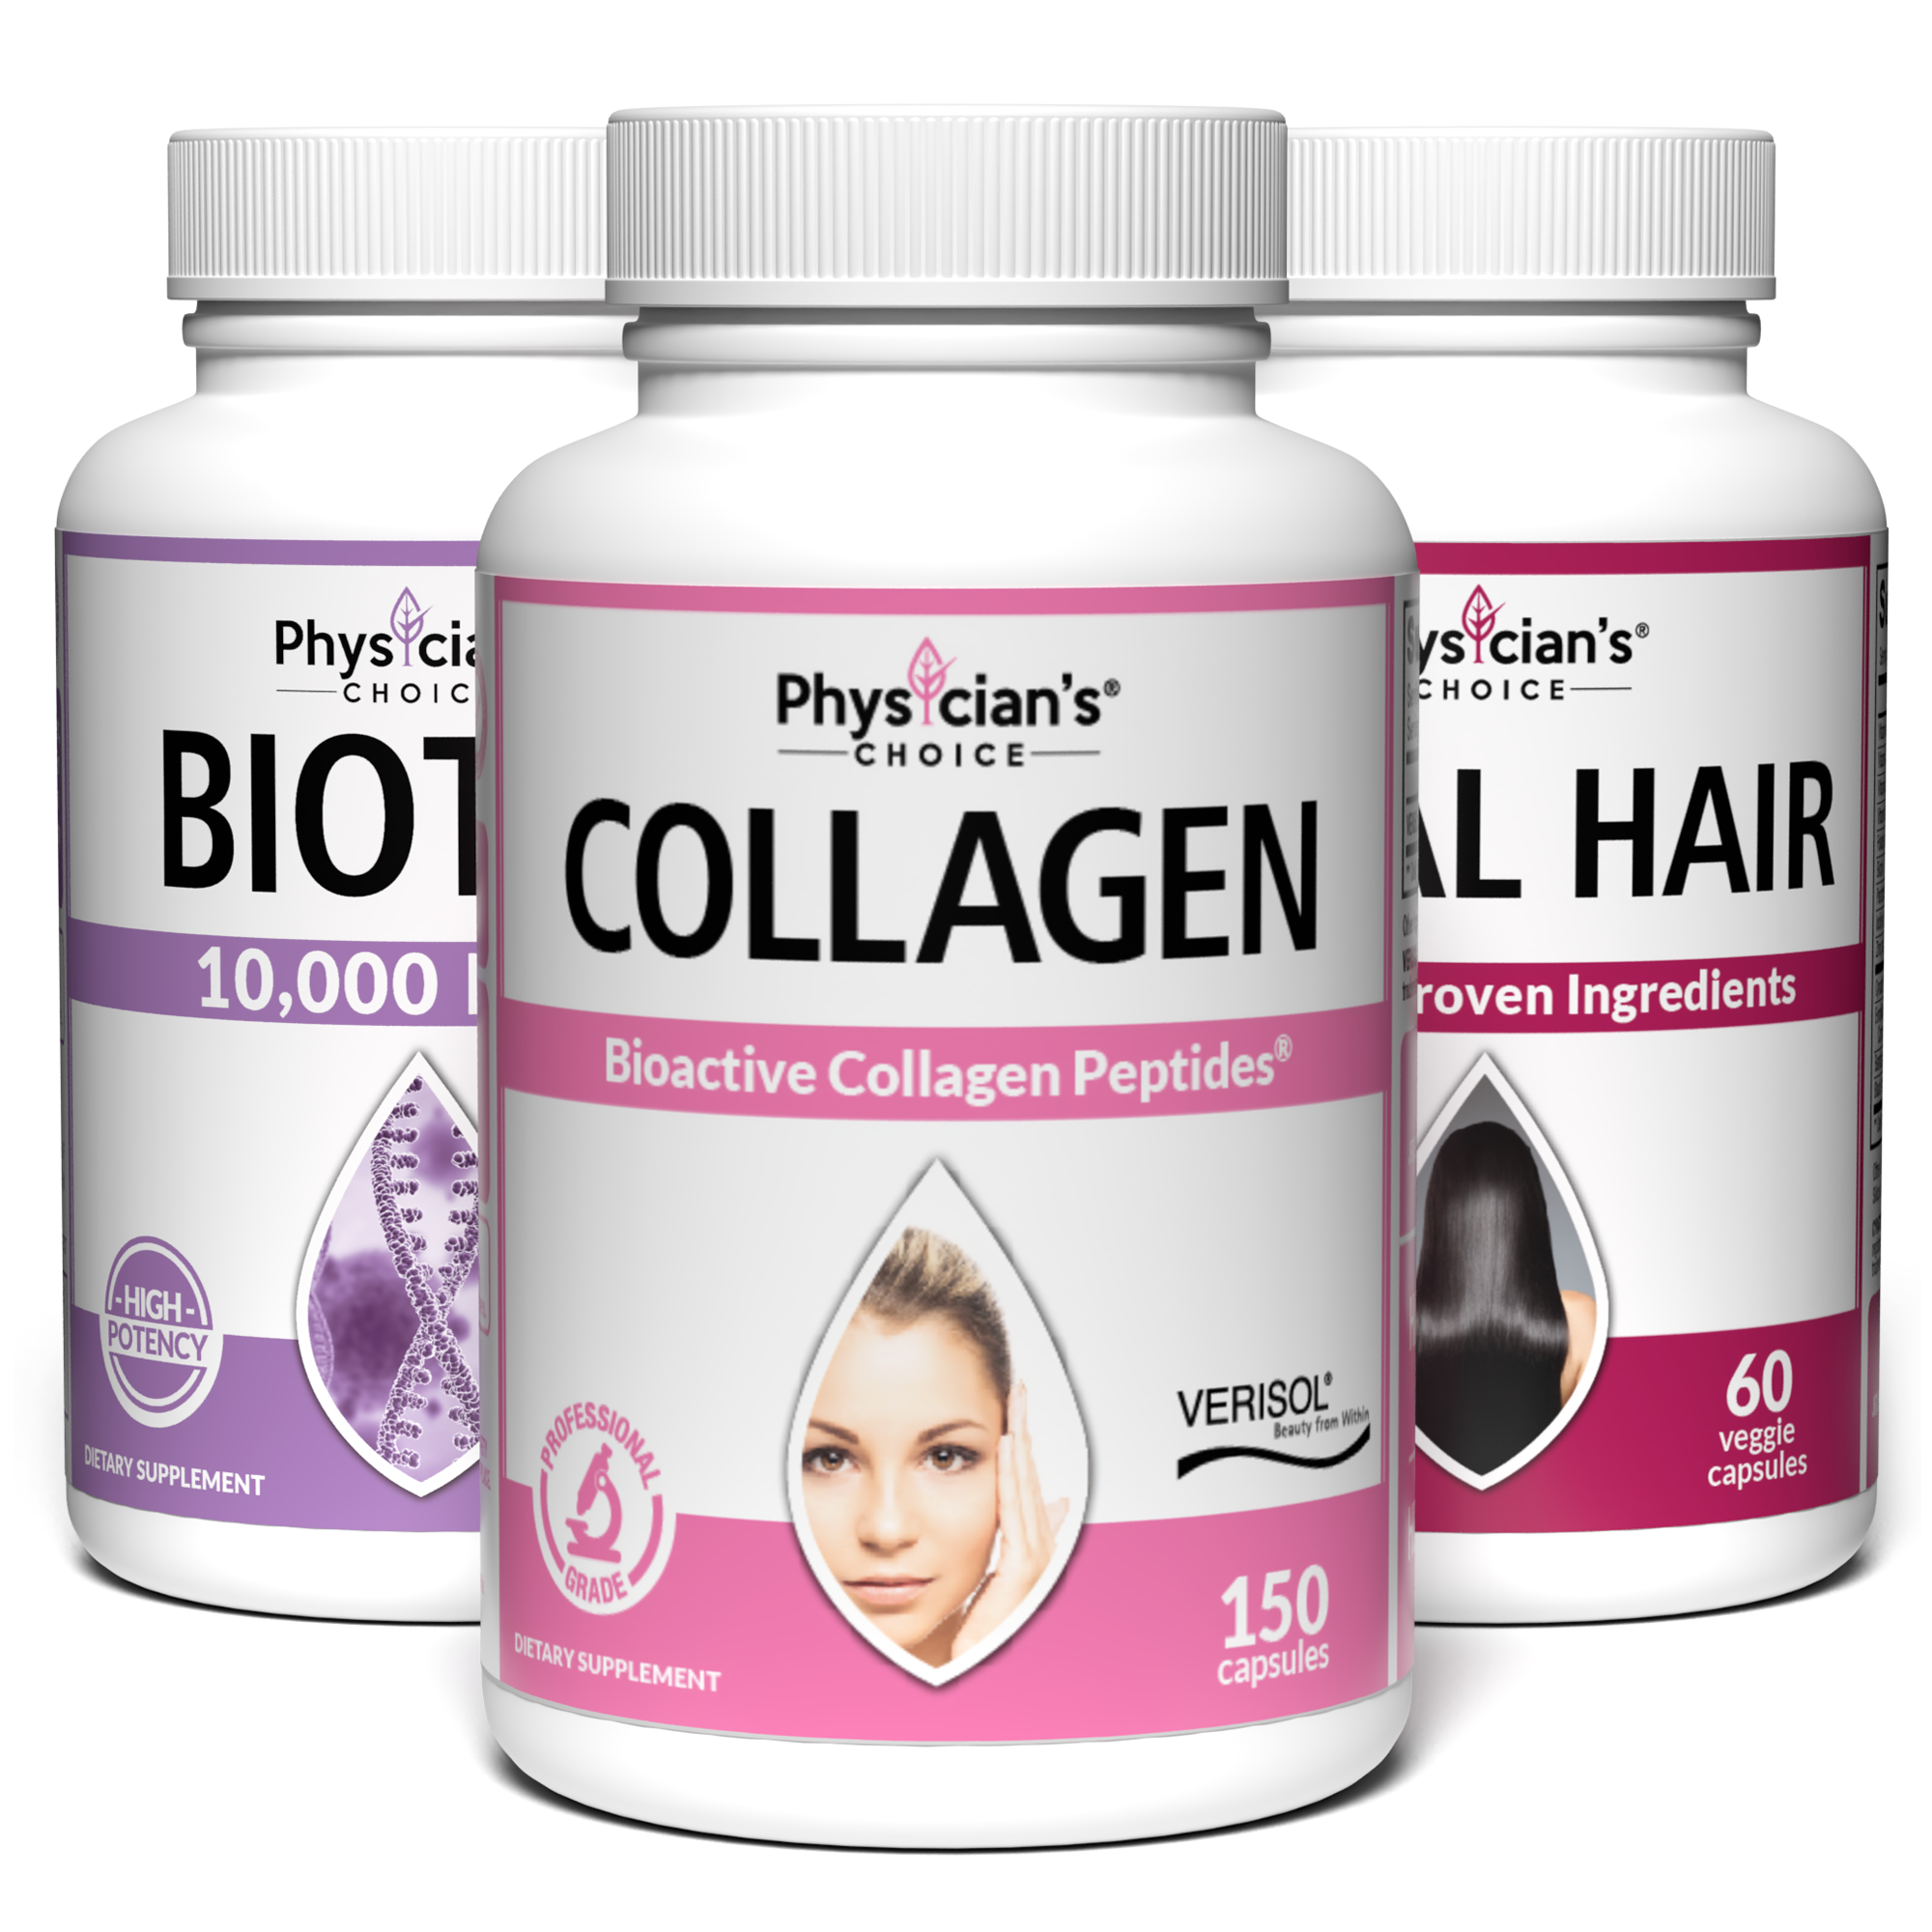 Skin, Nails and Hair Care Bundle with Biotin 10,000 mcg, Verisol Collagen, and Total Hair